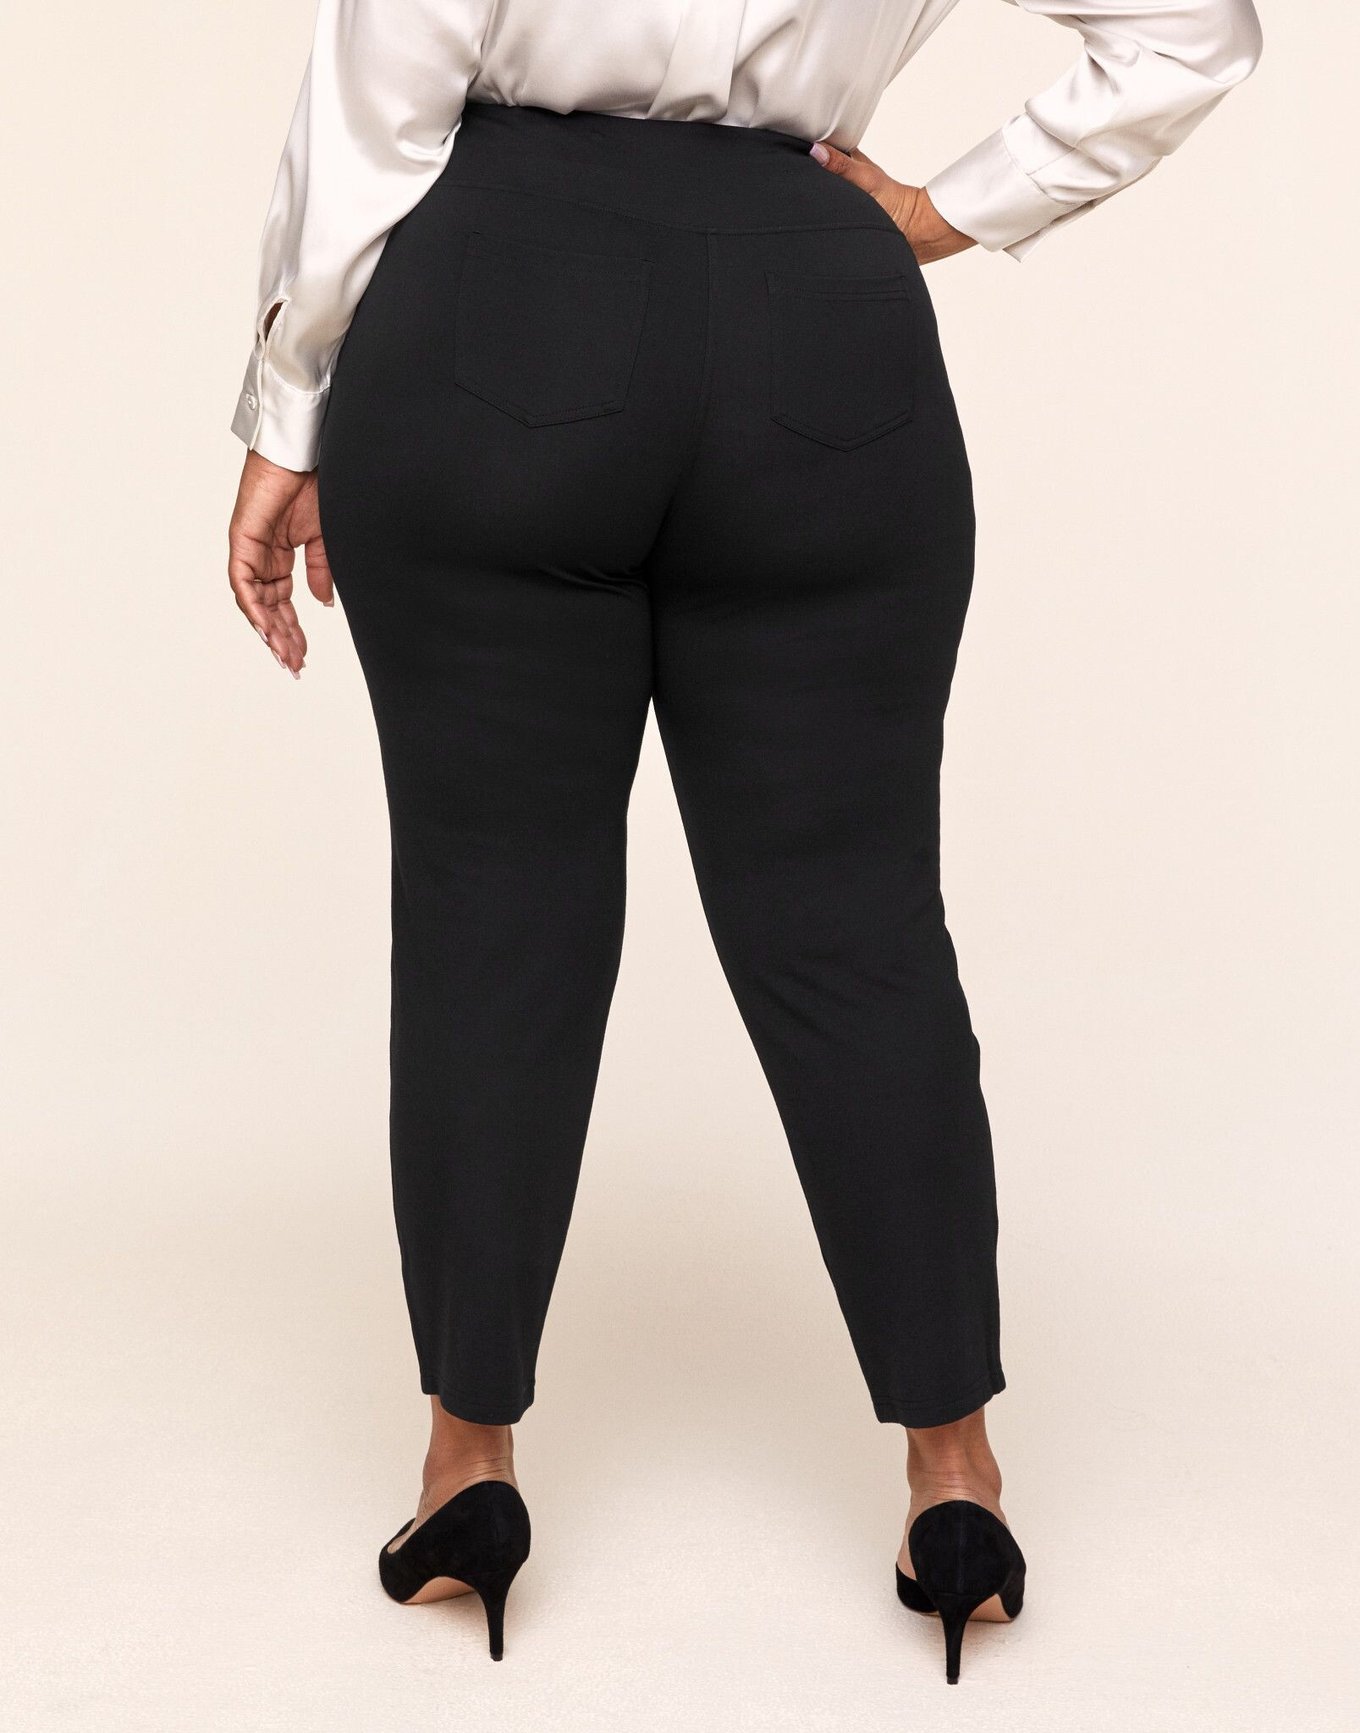 Encircled Women's Clothing | Comfy Tailored Ponte Dress Pants